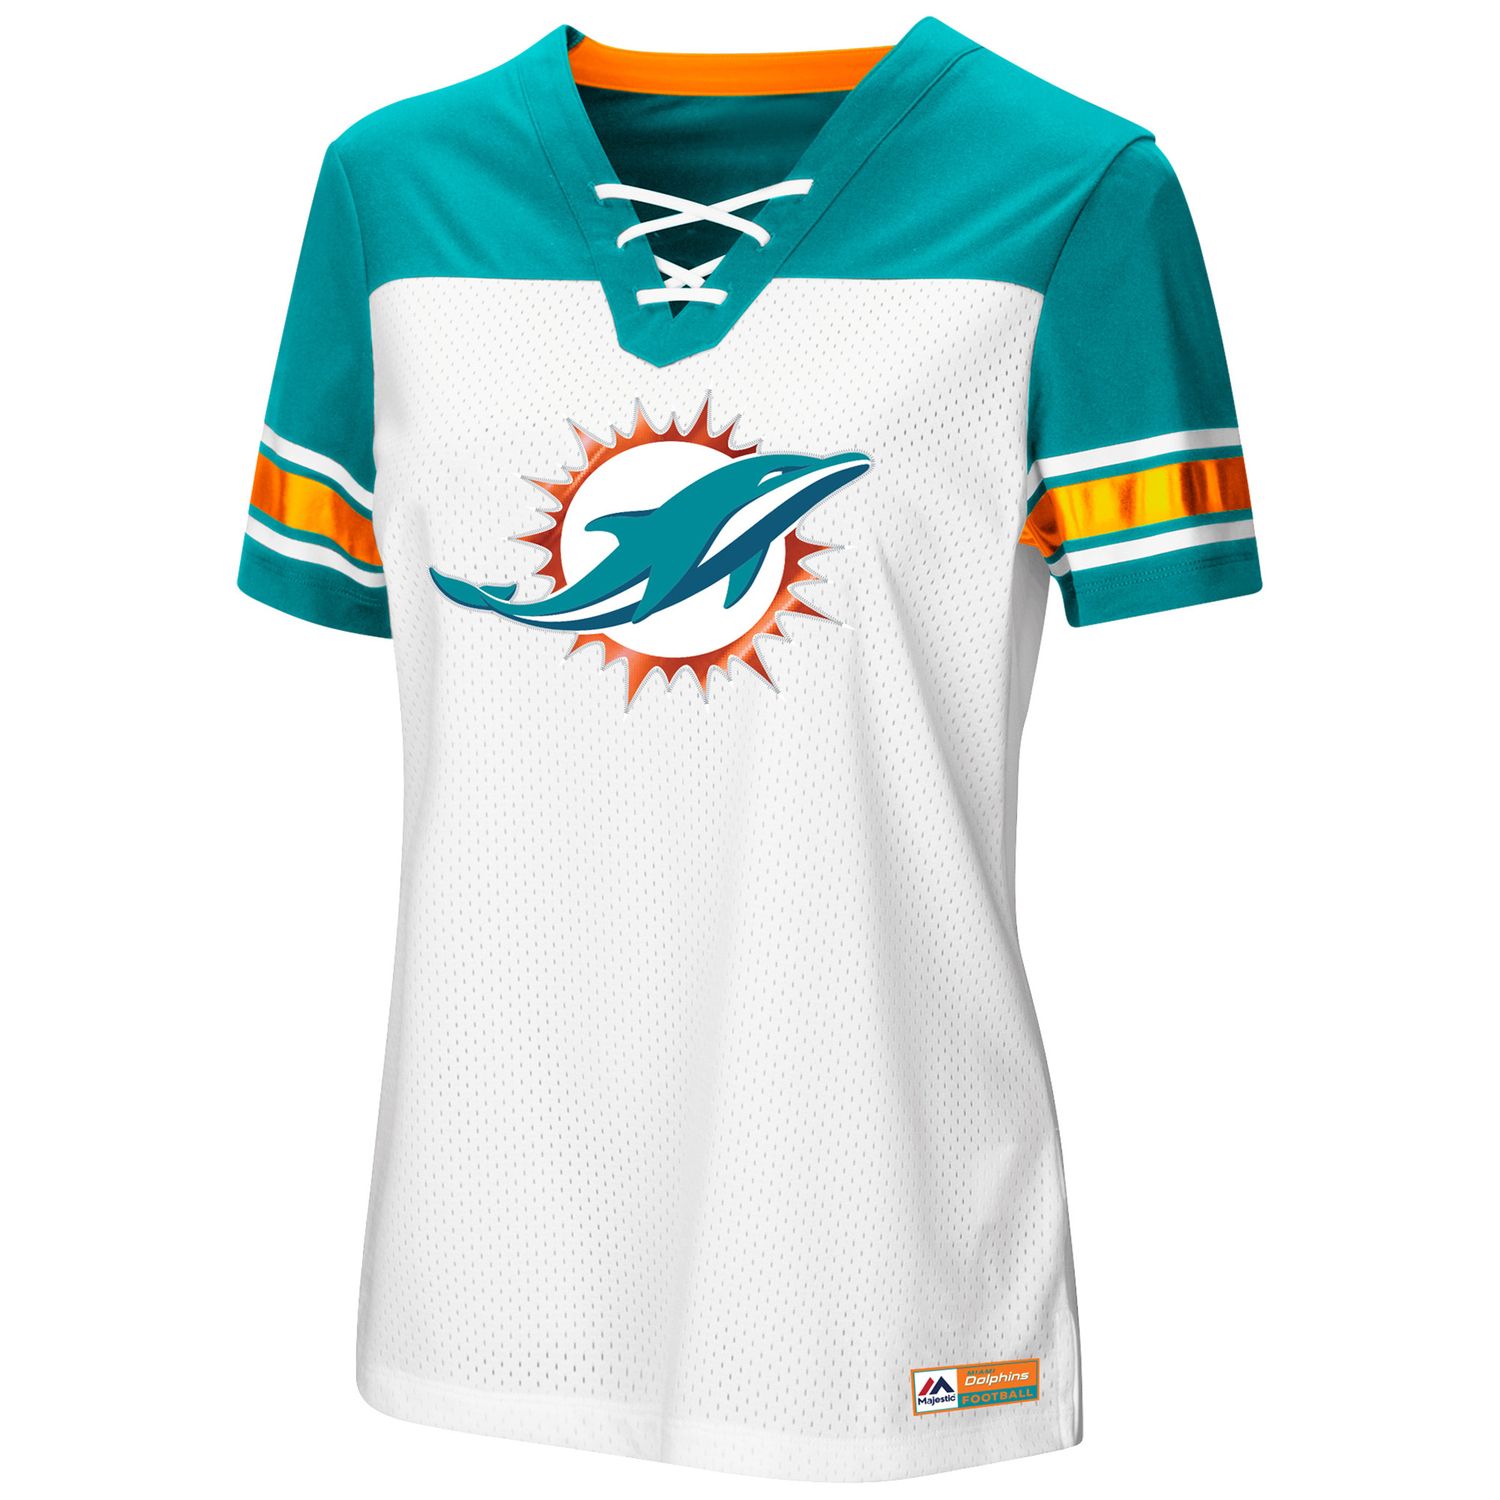 dolphins jersey near me